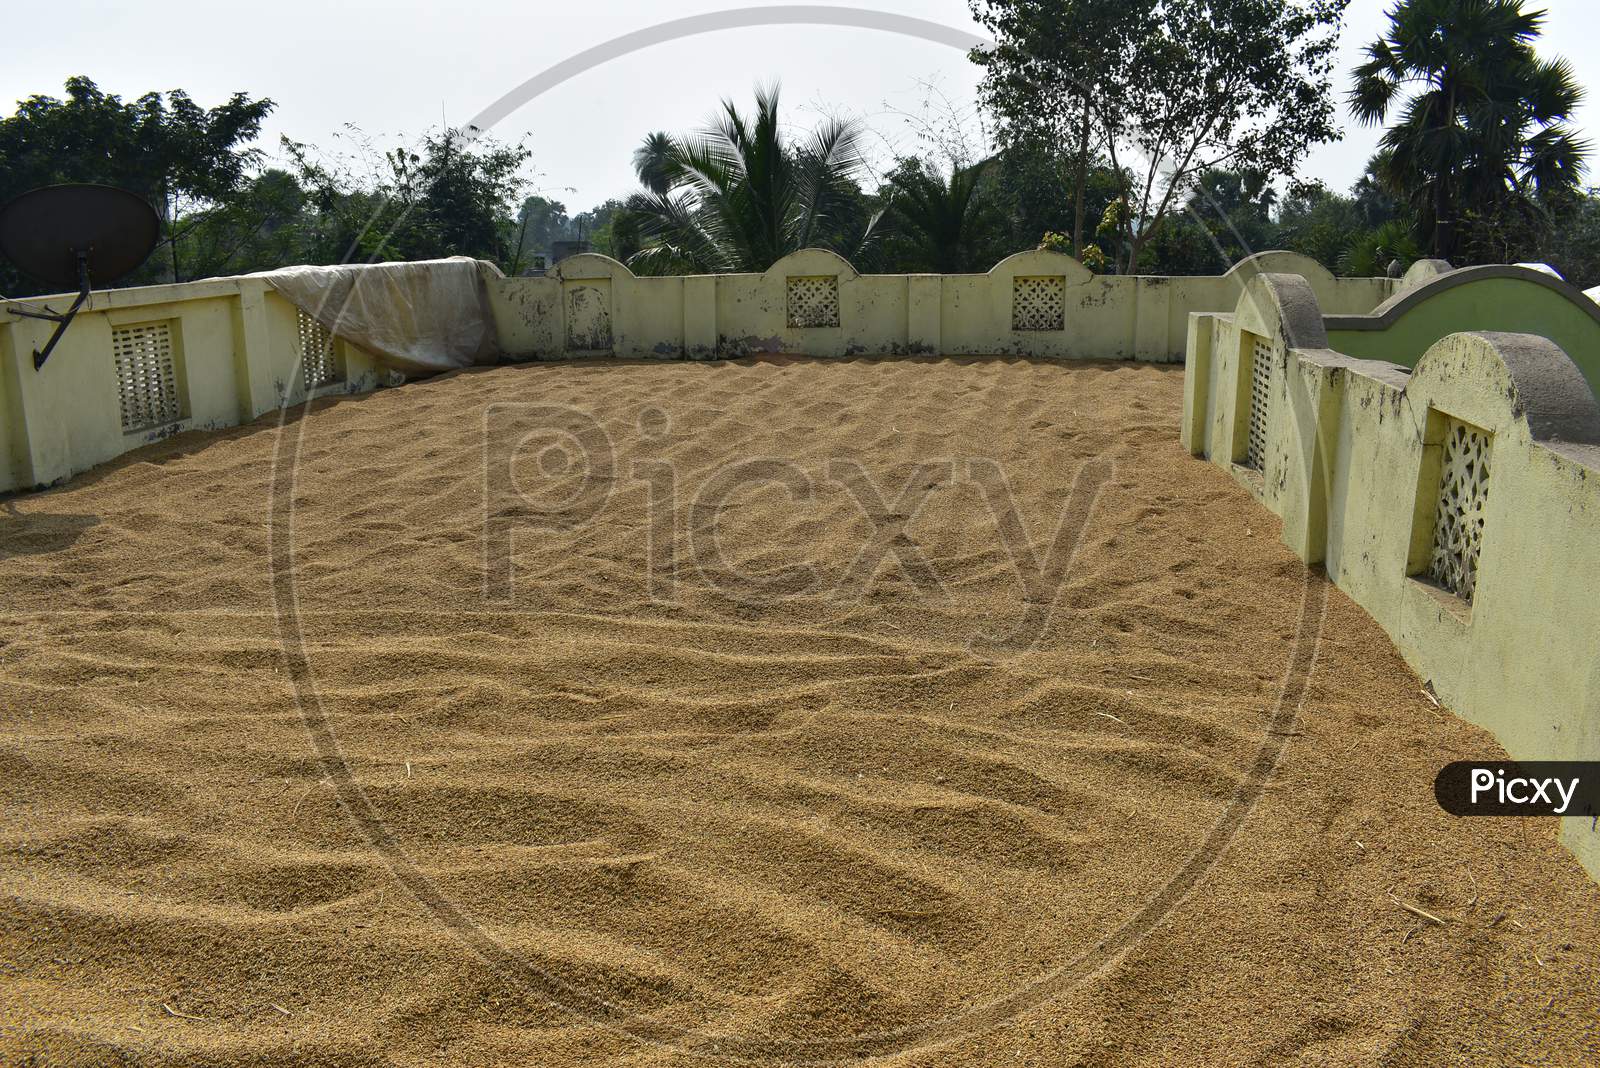 Paddy Seeds Spread In Ground To Dry Under Open Sunlight